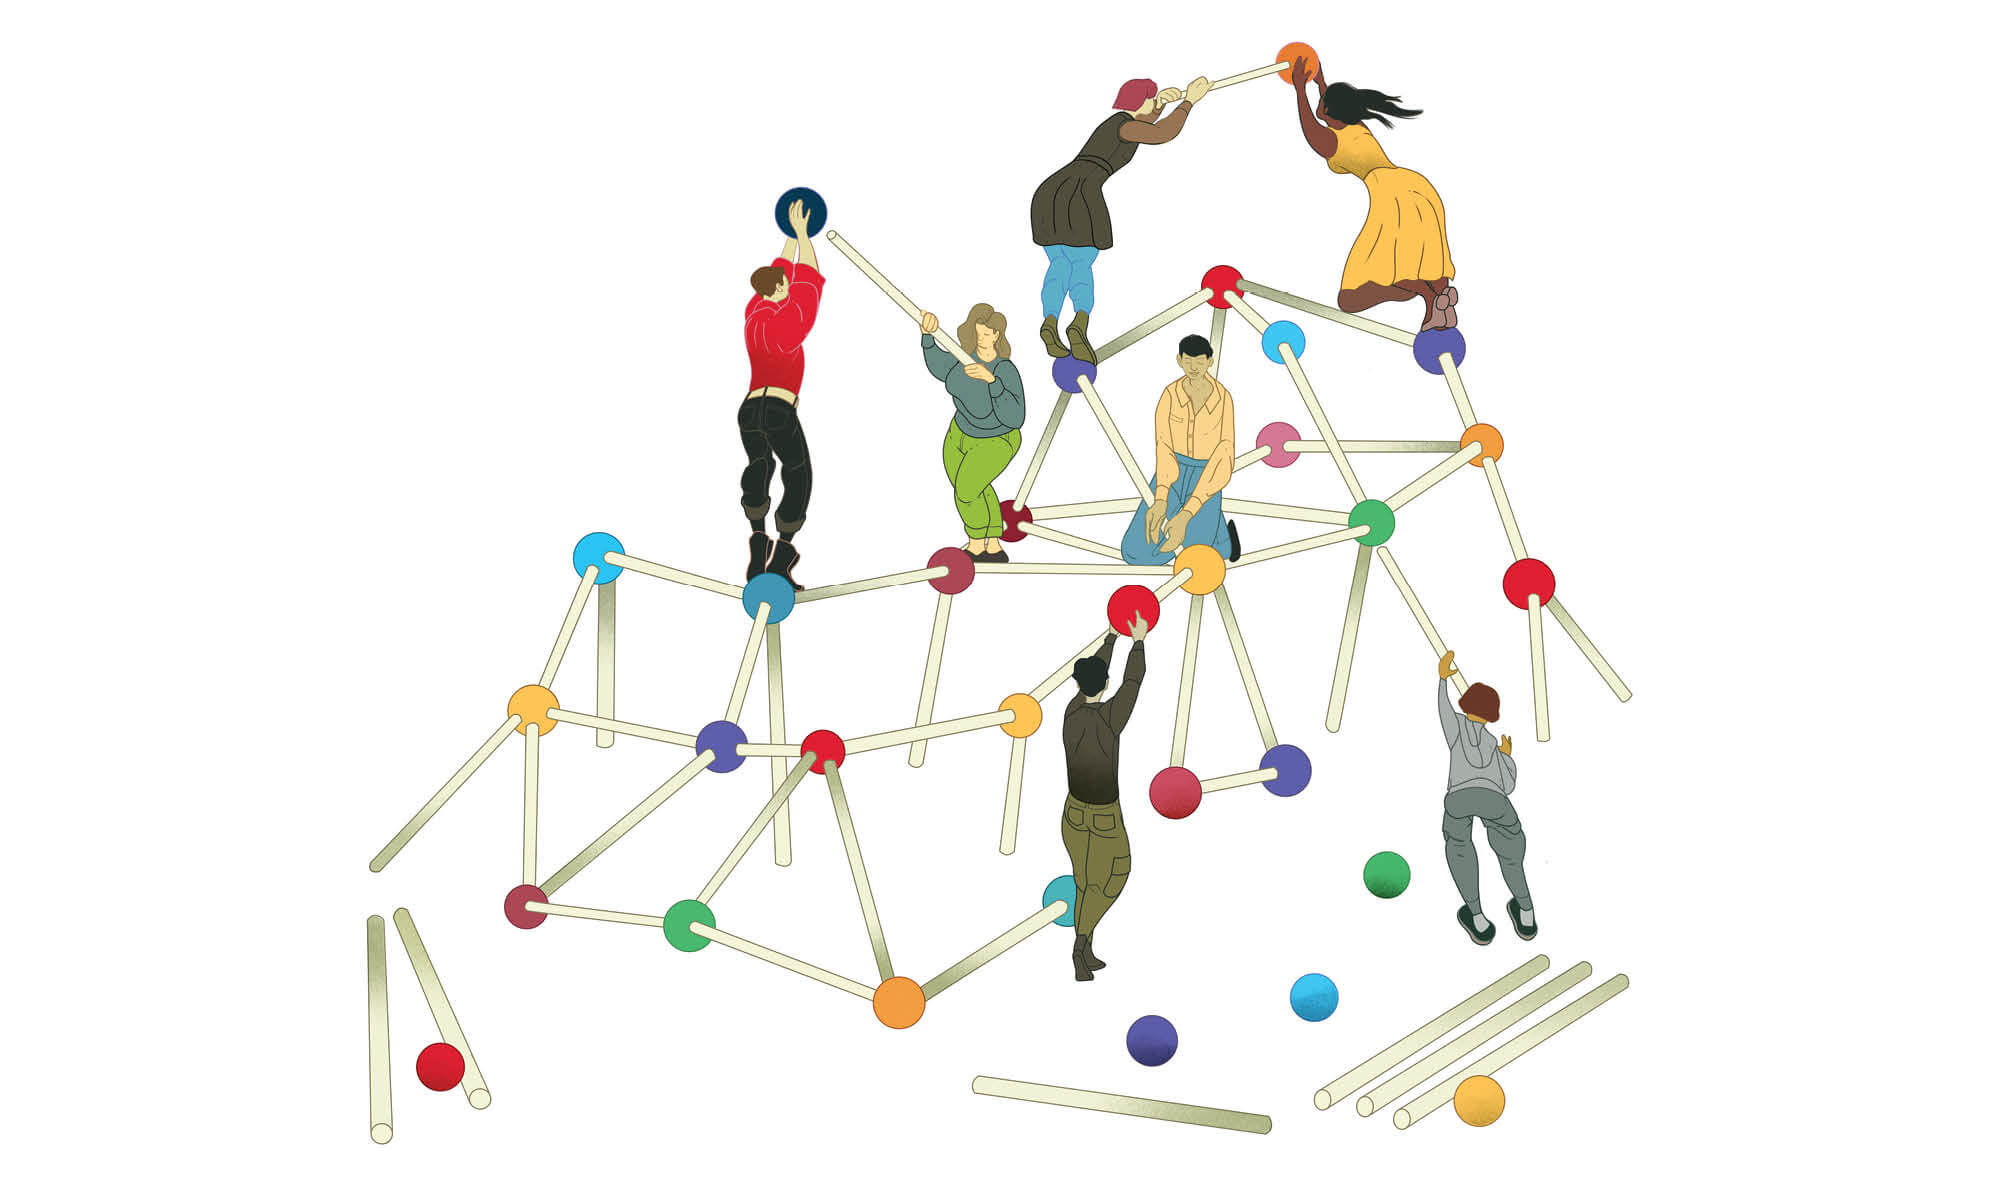 Seven people putting together what looks like a play structure made of Tinkertoy-like pieces of rods and balls.